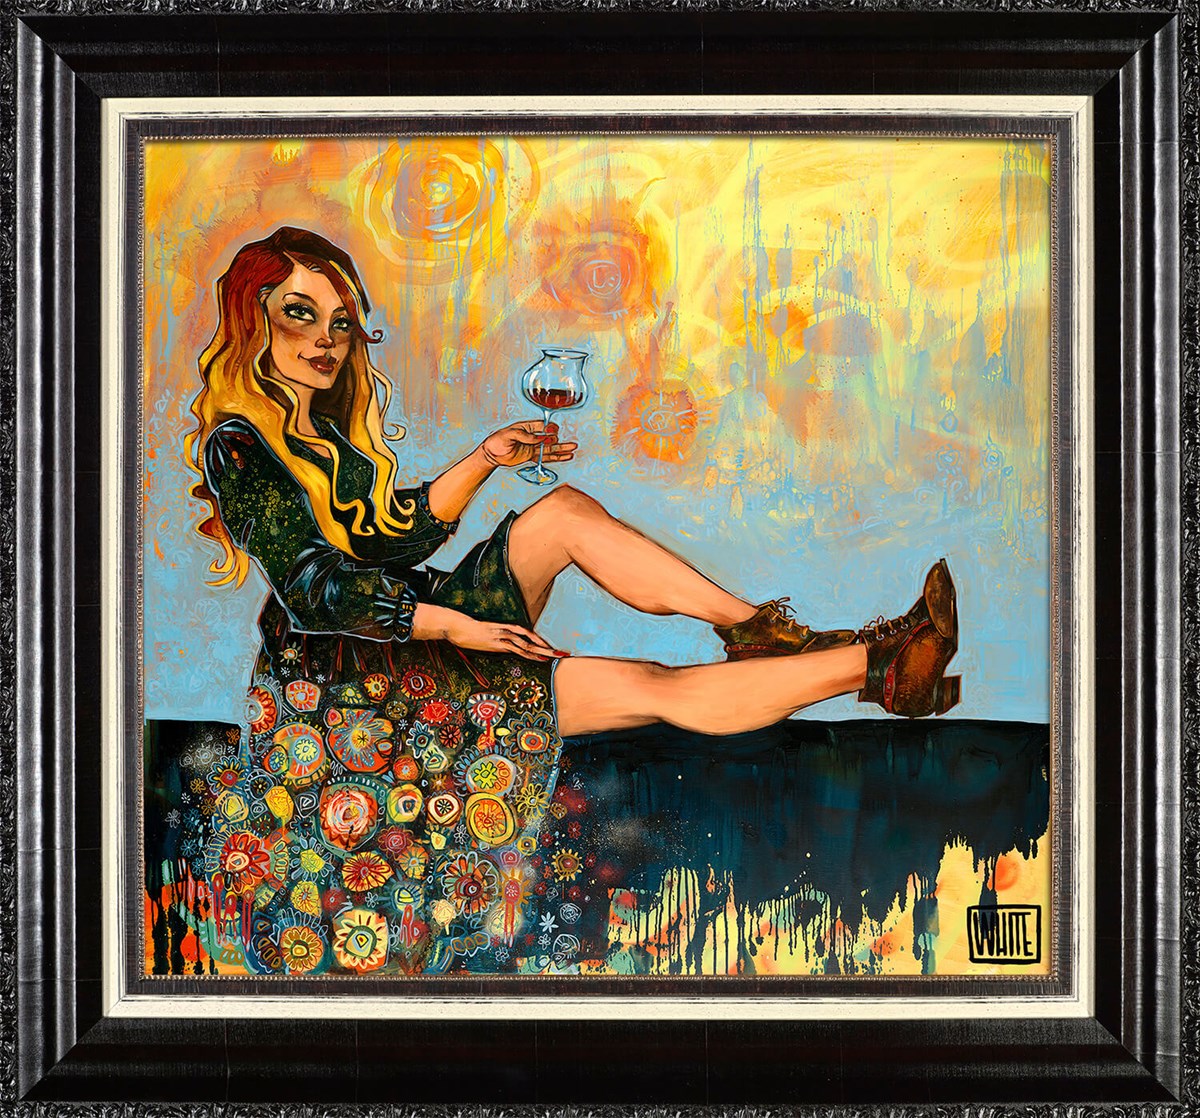 Boots Like These limited edition print by Todd White